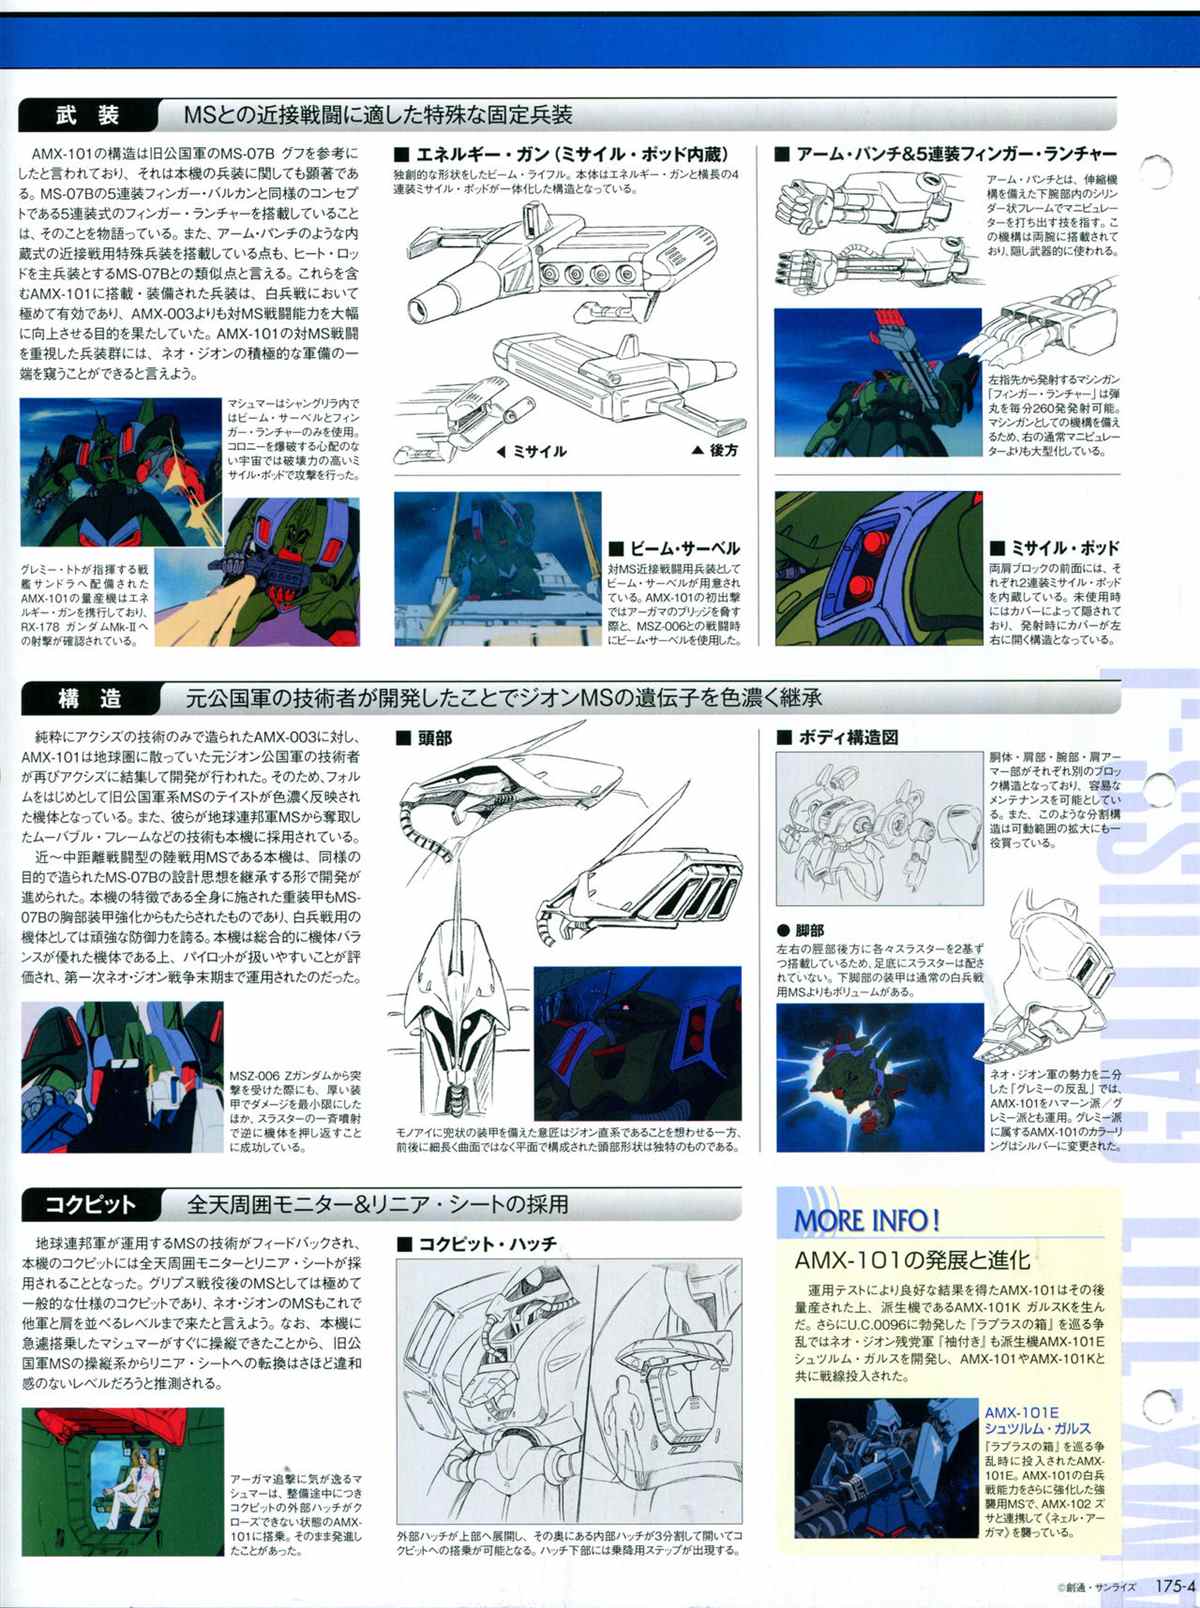 The Official Gundam Perfect File  - 第175話 - 6